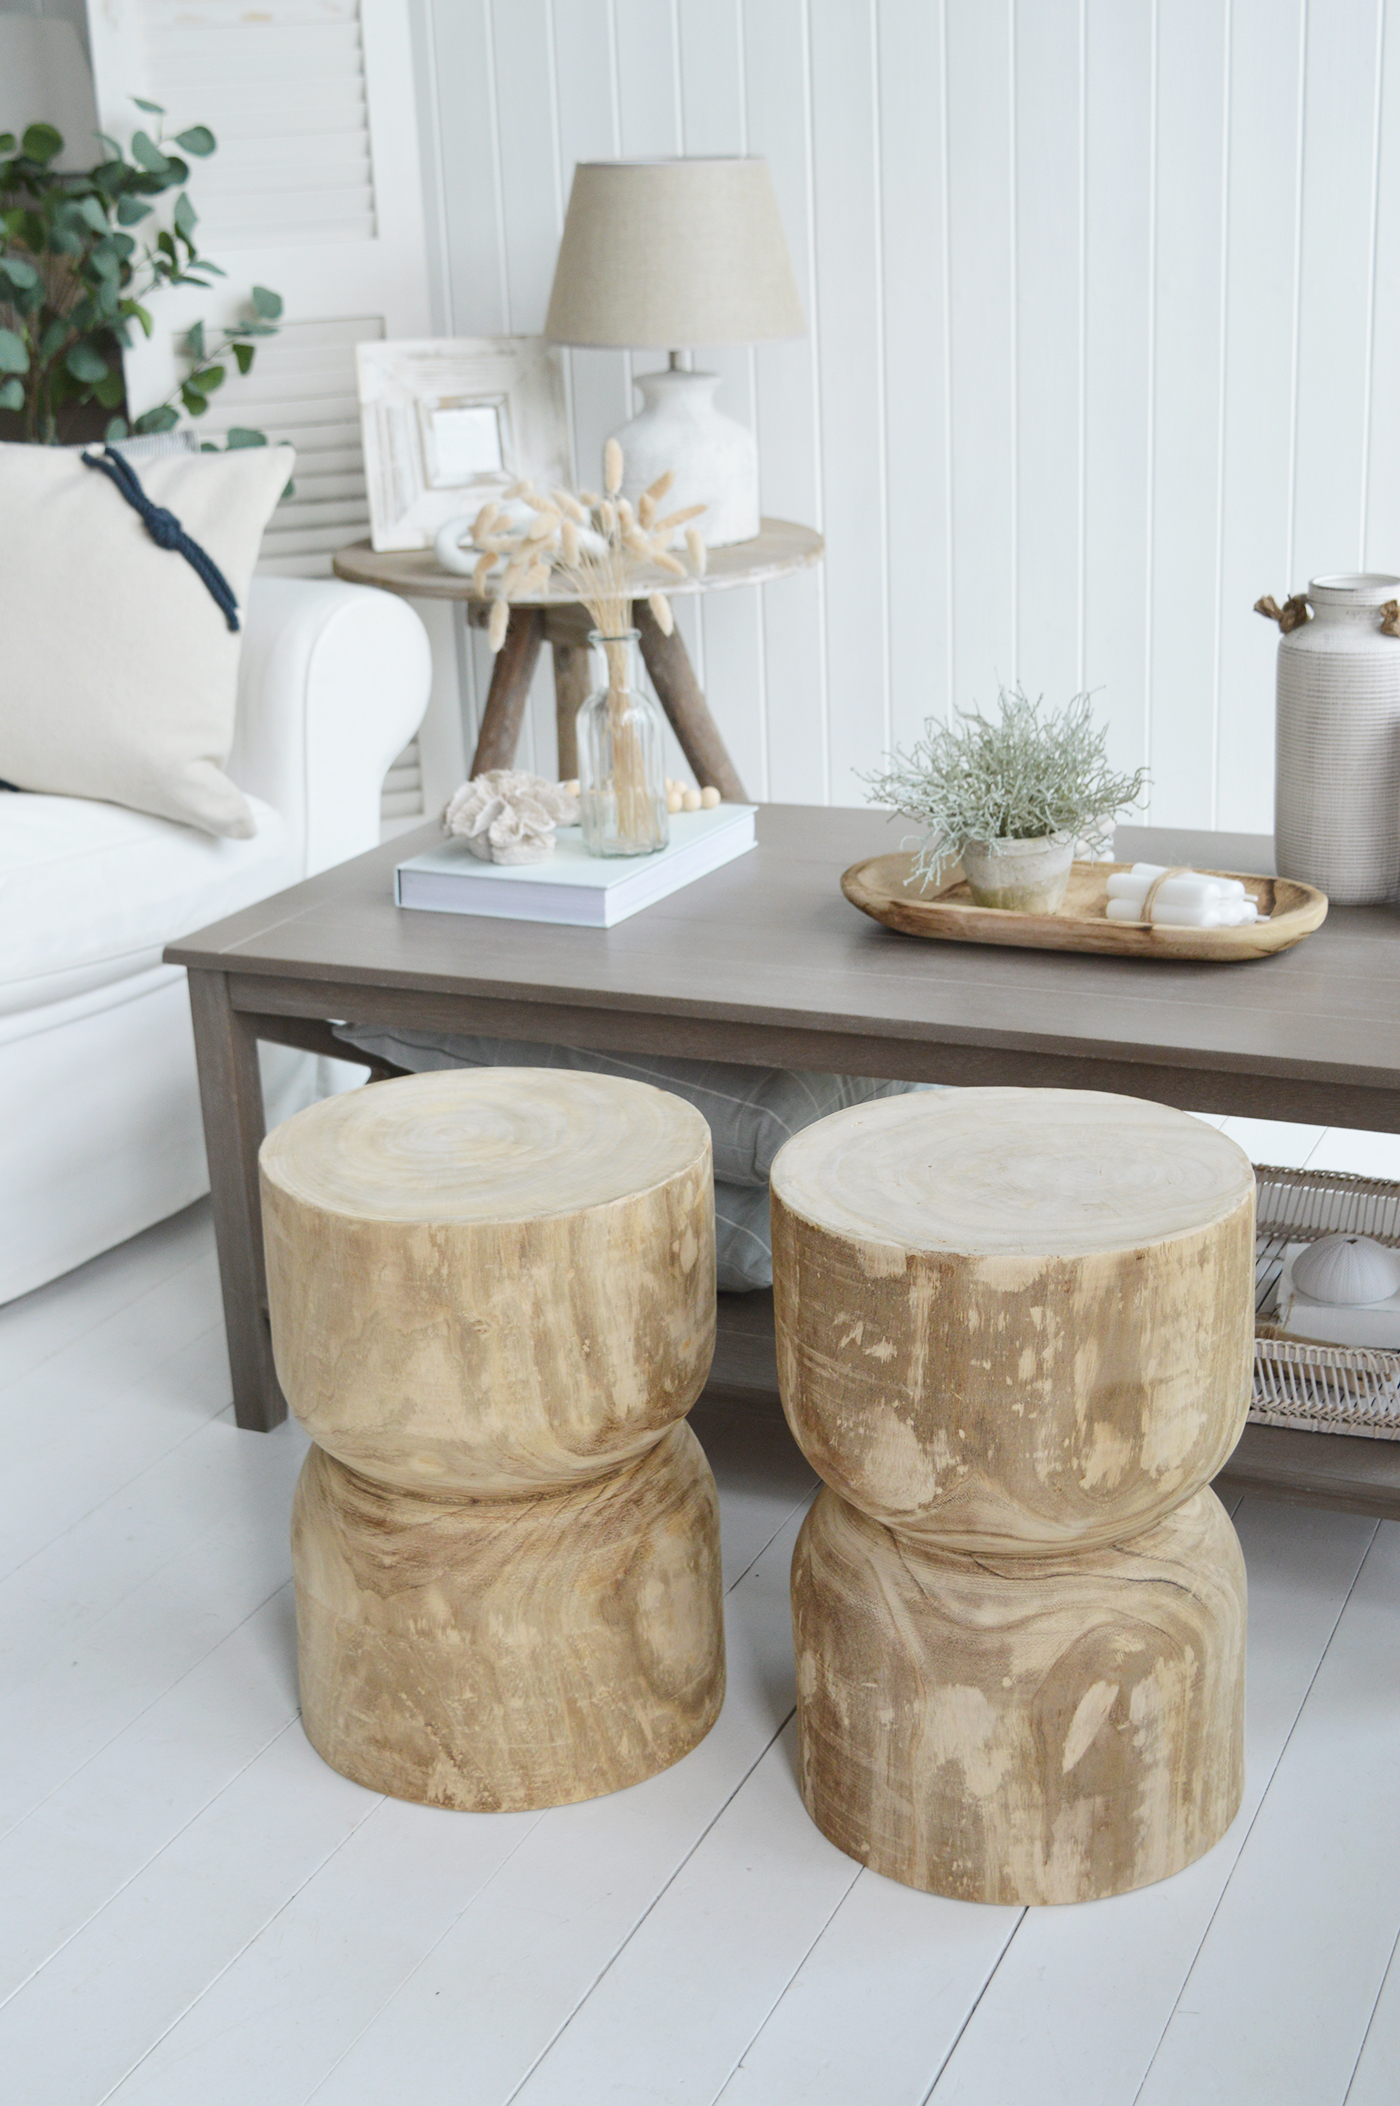 The Ascot wooden stools around a coastal coffee table for a chic Hamptons look to a living room